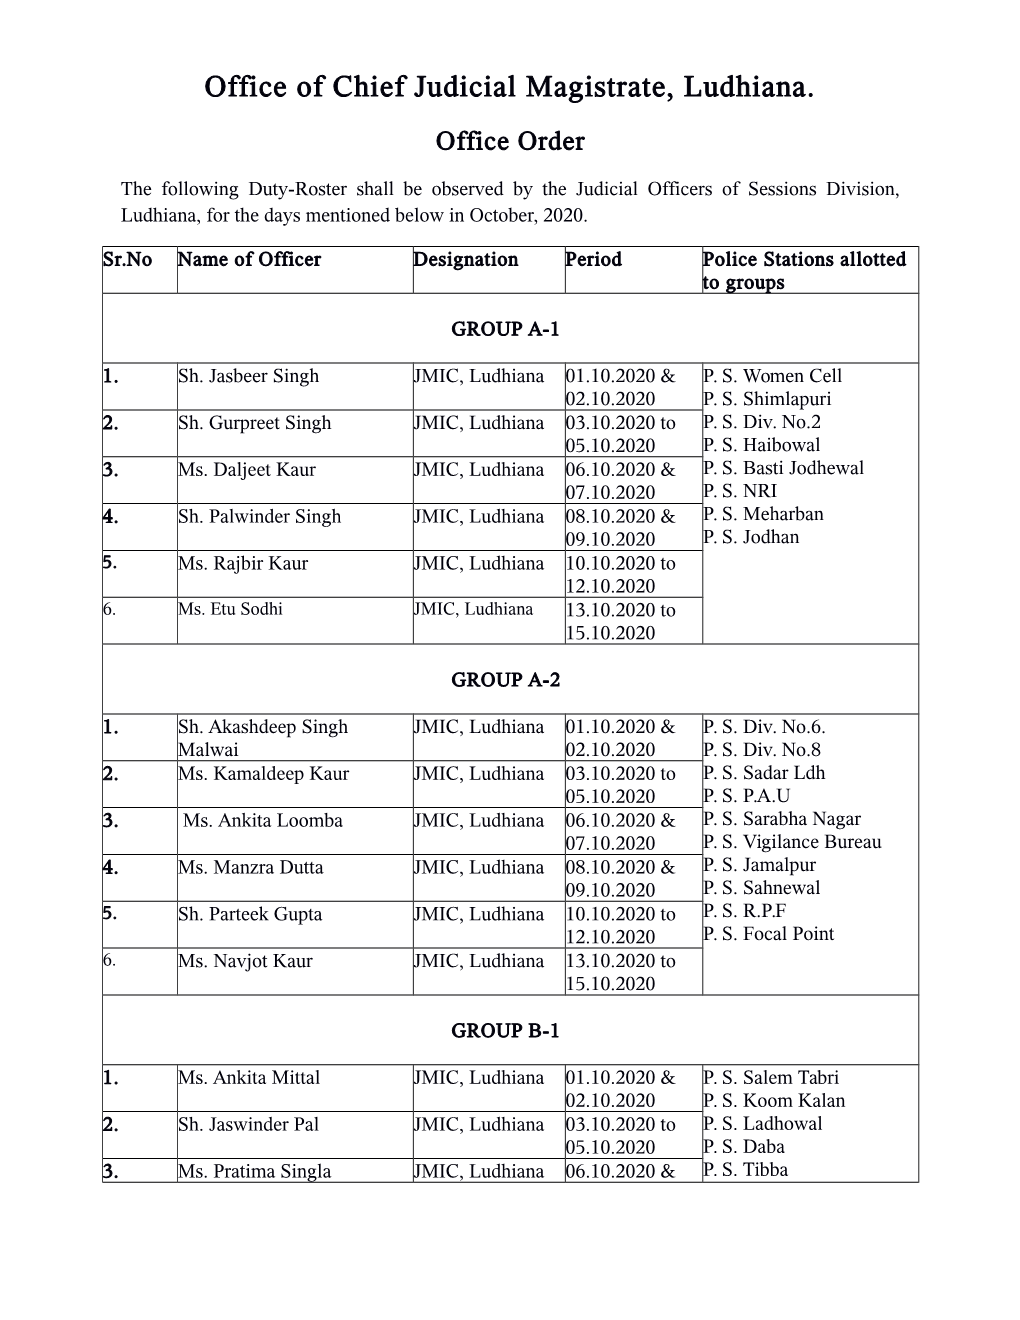 Office of Chief Judicial Magistrate, Ludhiana. Office Order